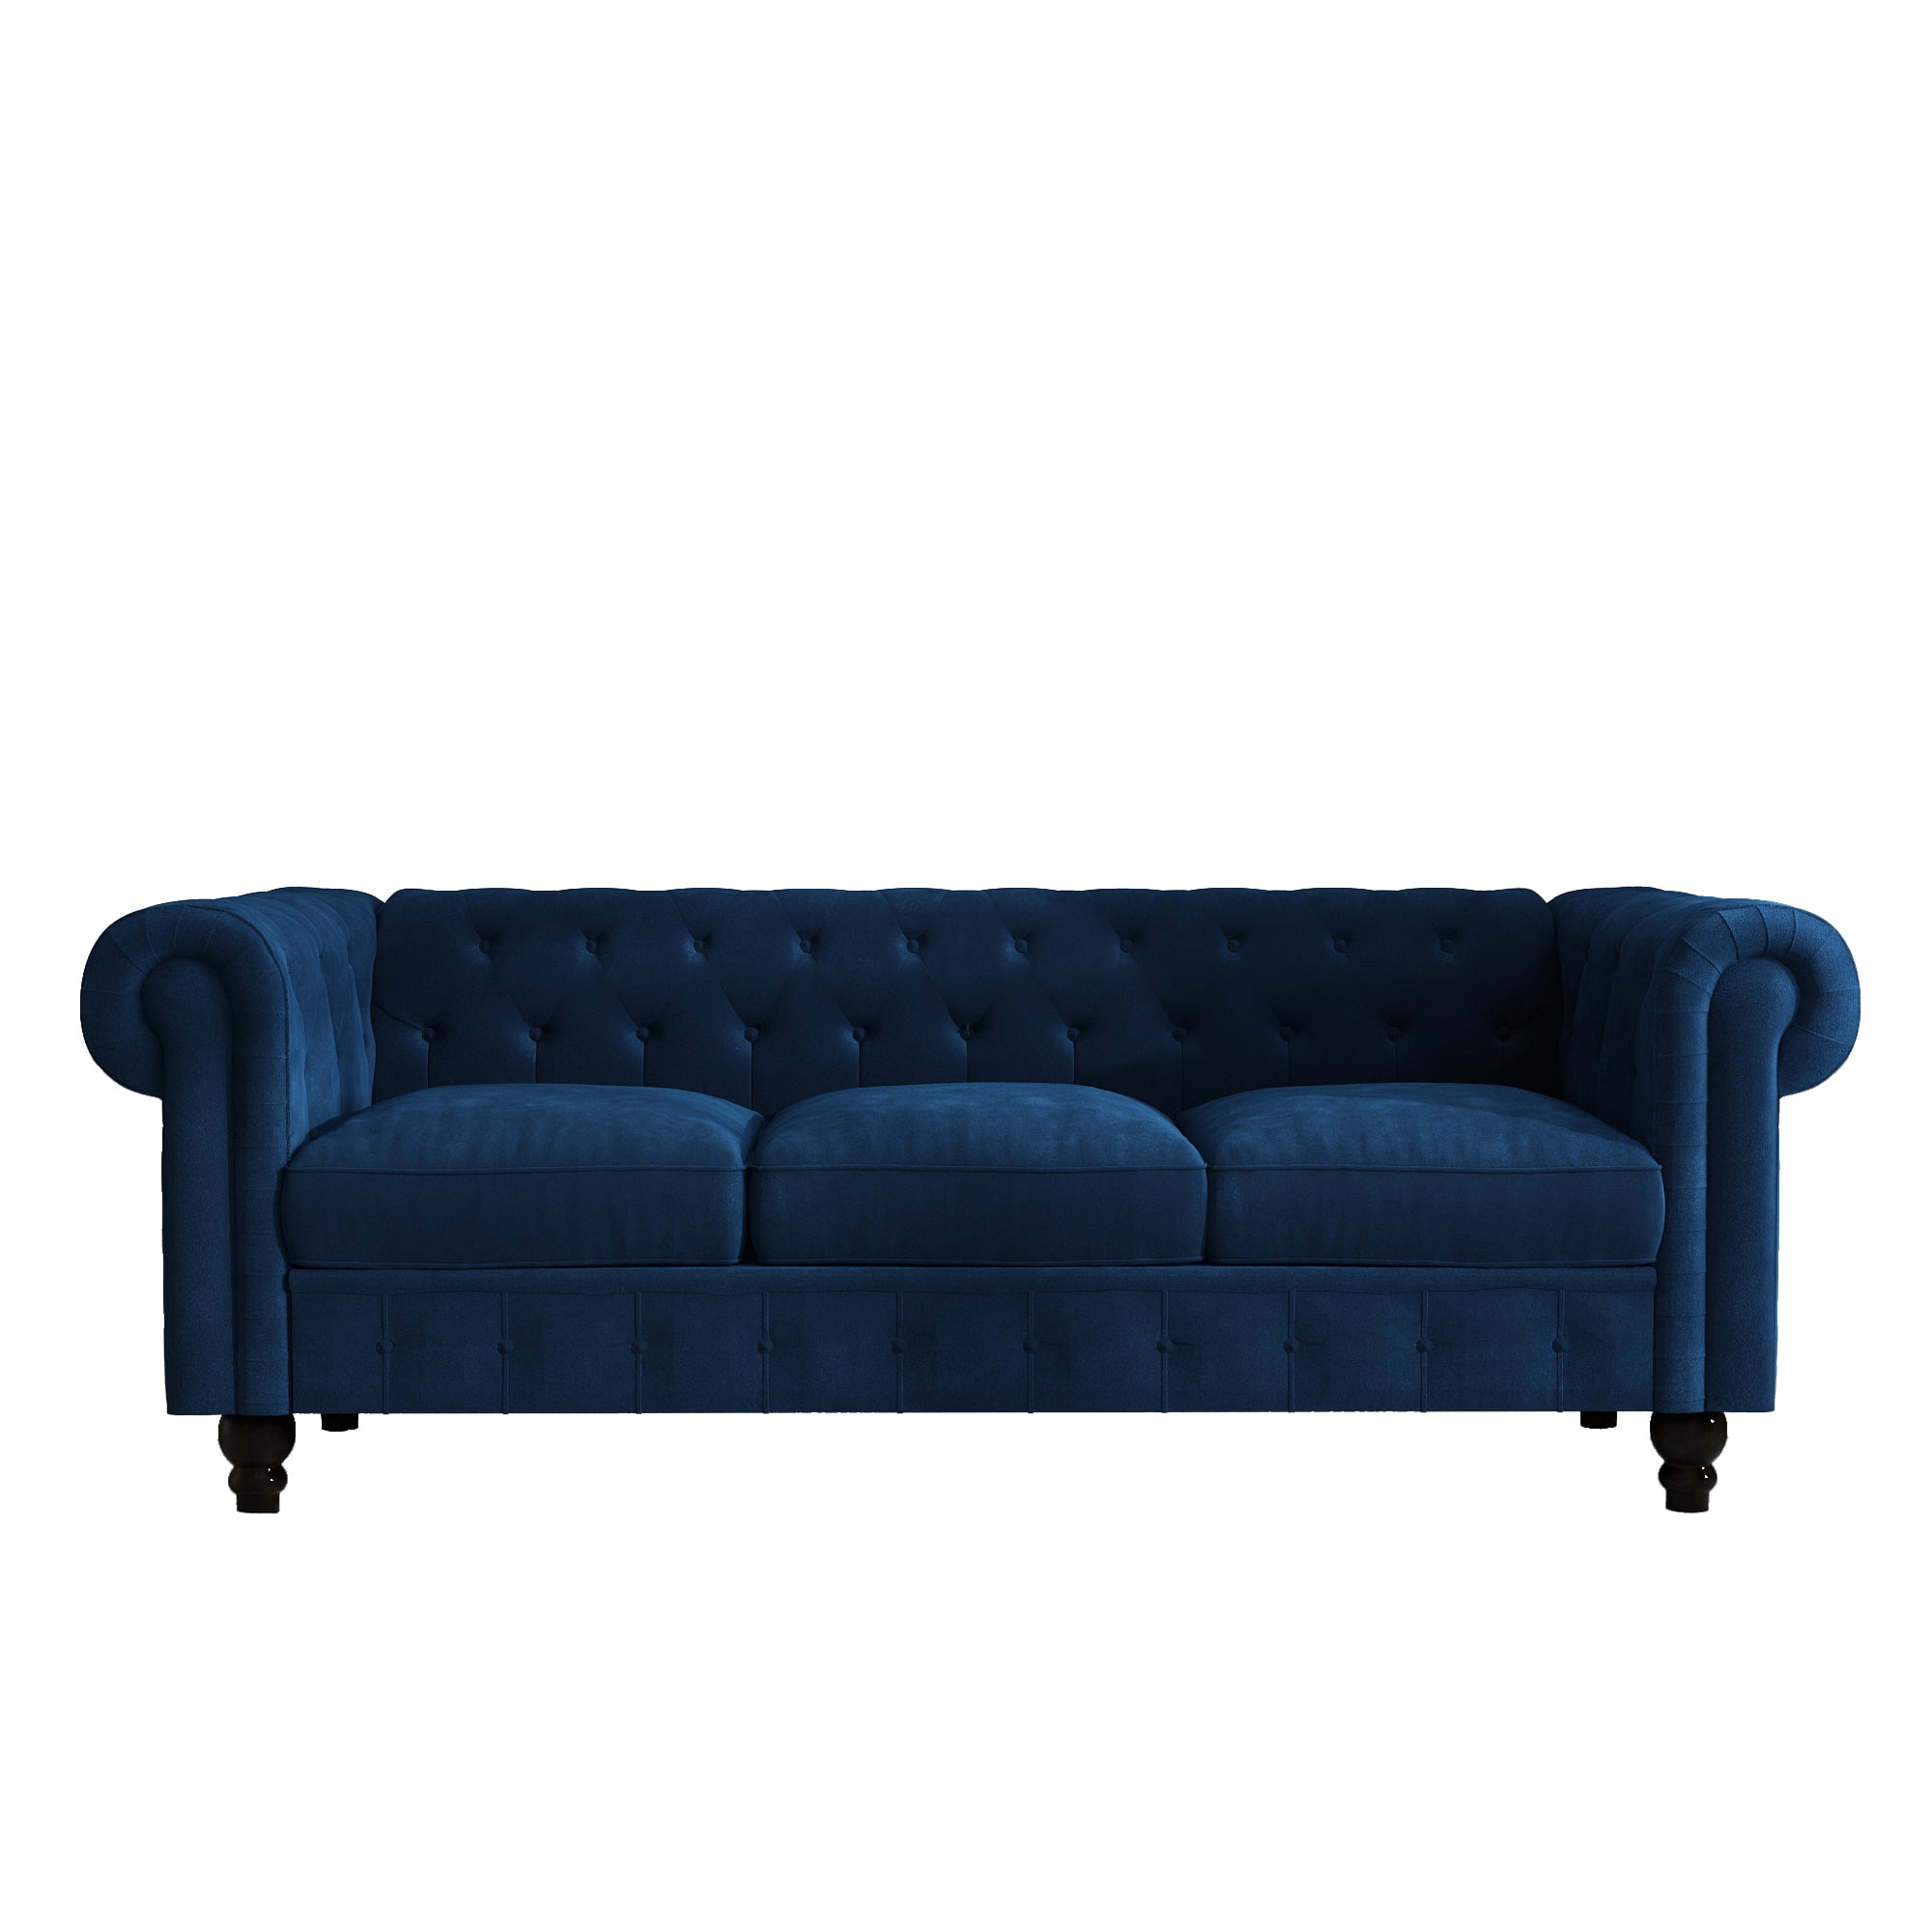 Chesterfield Style Sofa with Flared Arms and Tufted Back for Home Living Room - 3 seats Sofa Multicolor Velvet / PU Cover